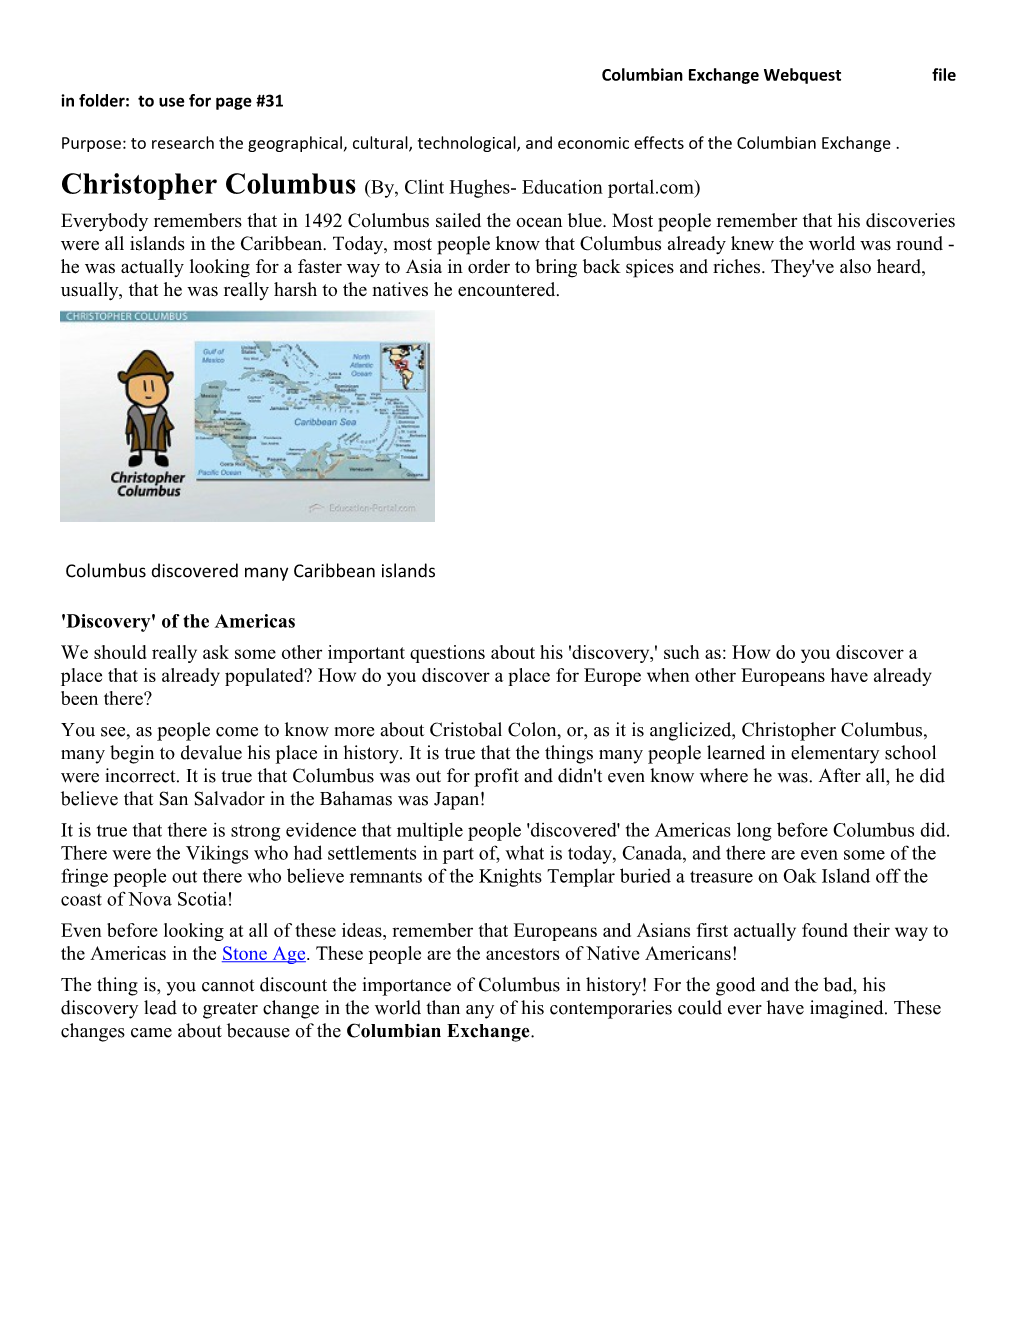 Columbian Exchange Webquest File in Folder: to Use for Page #31